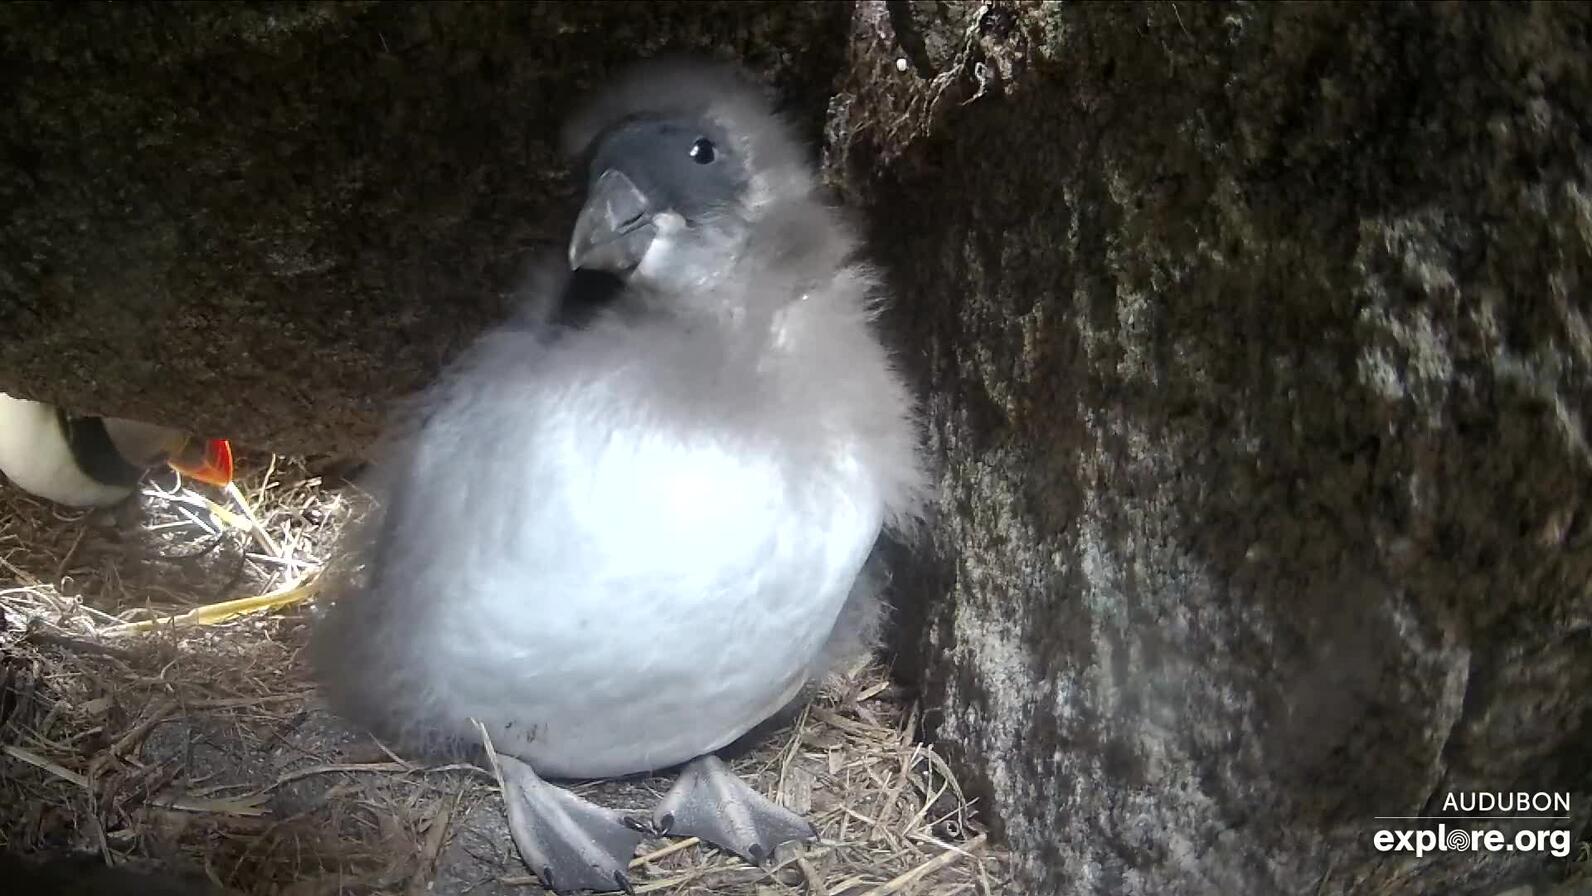 Duryea the puffling is growing his "grown-up" feathers